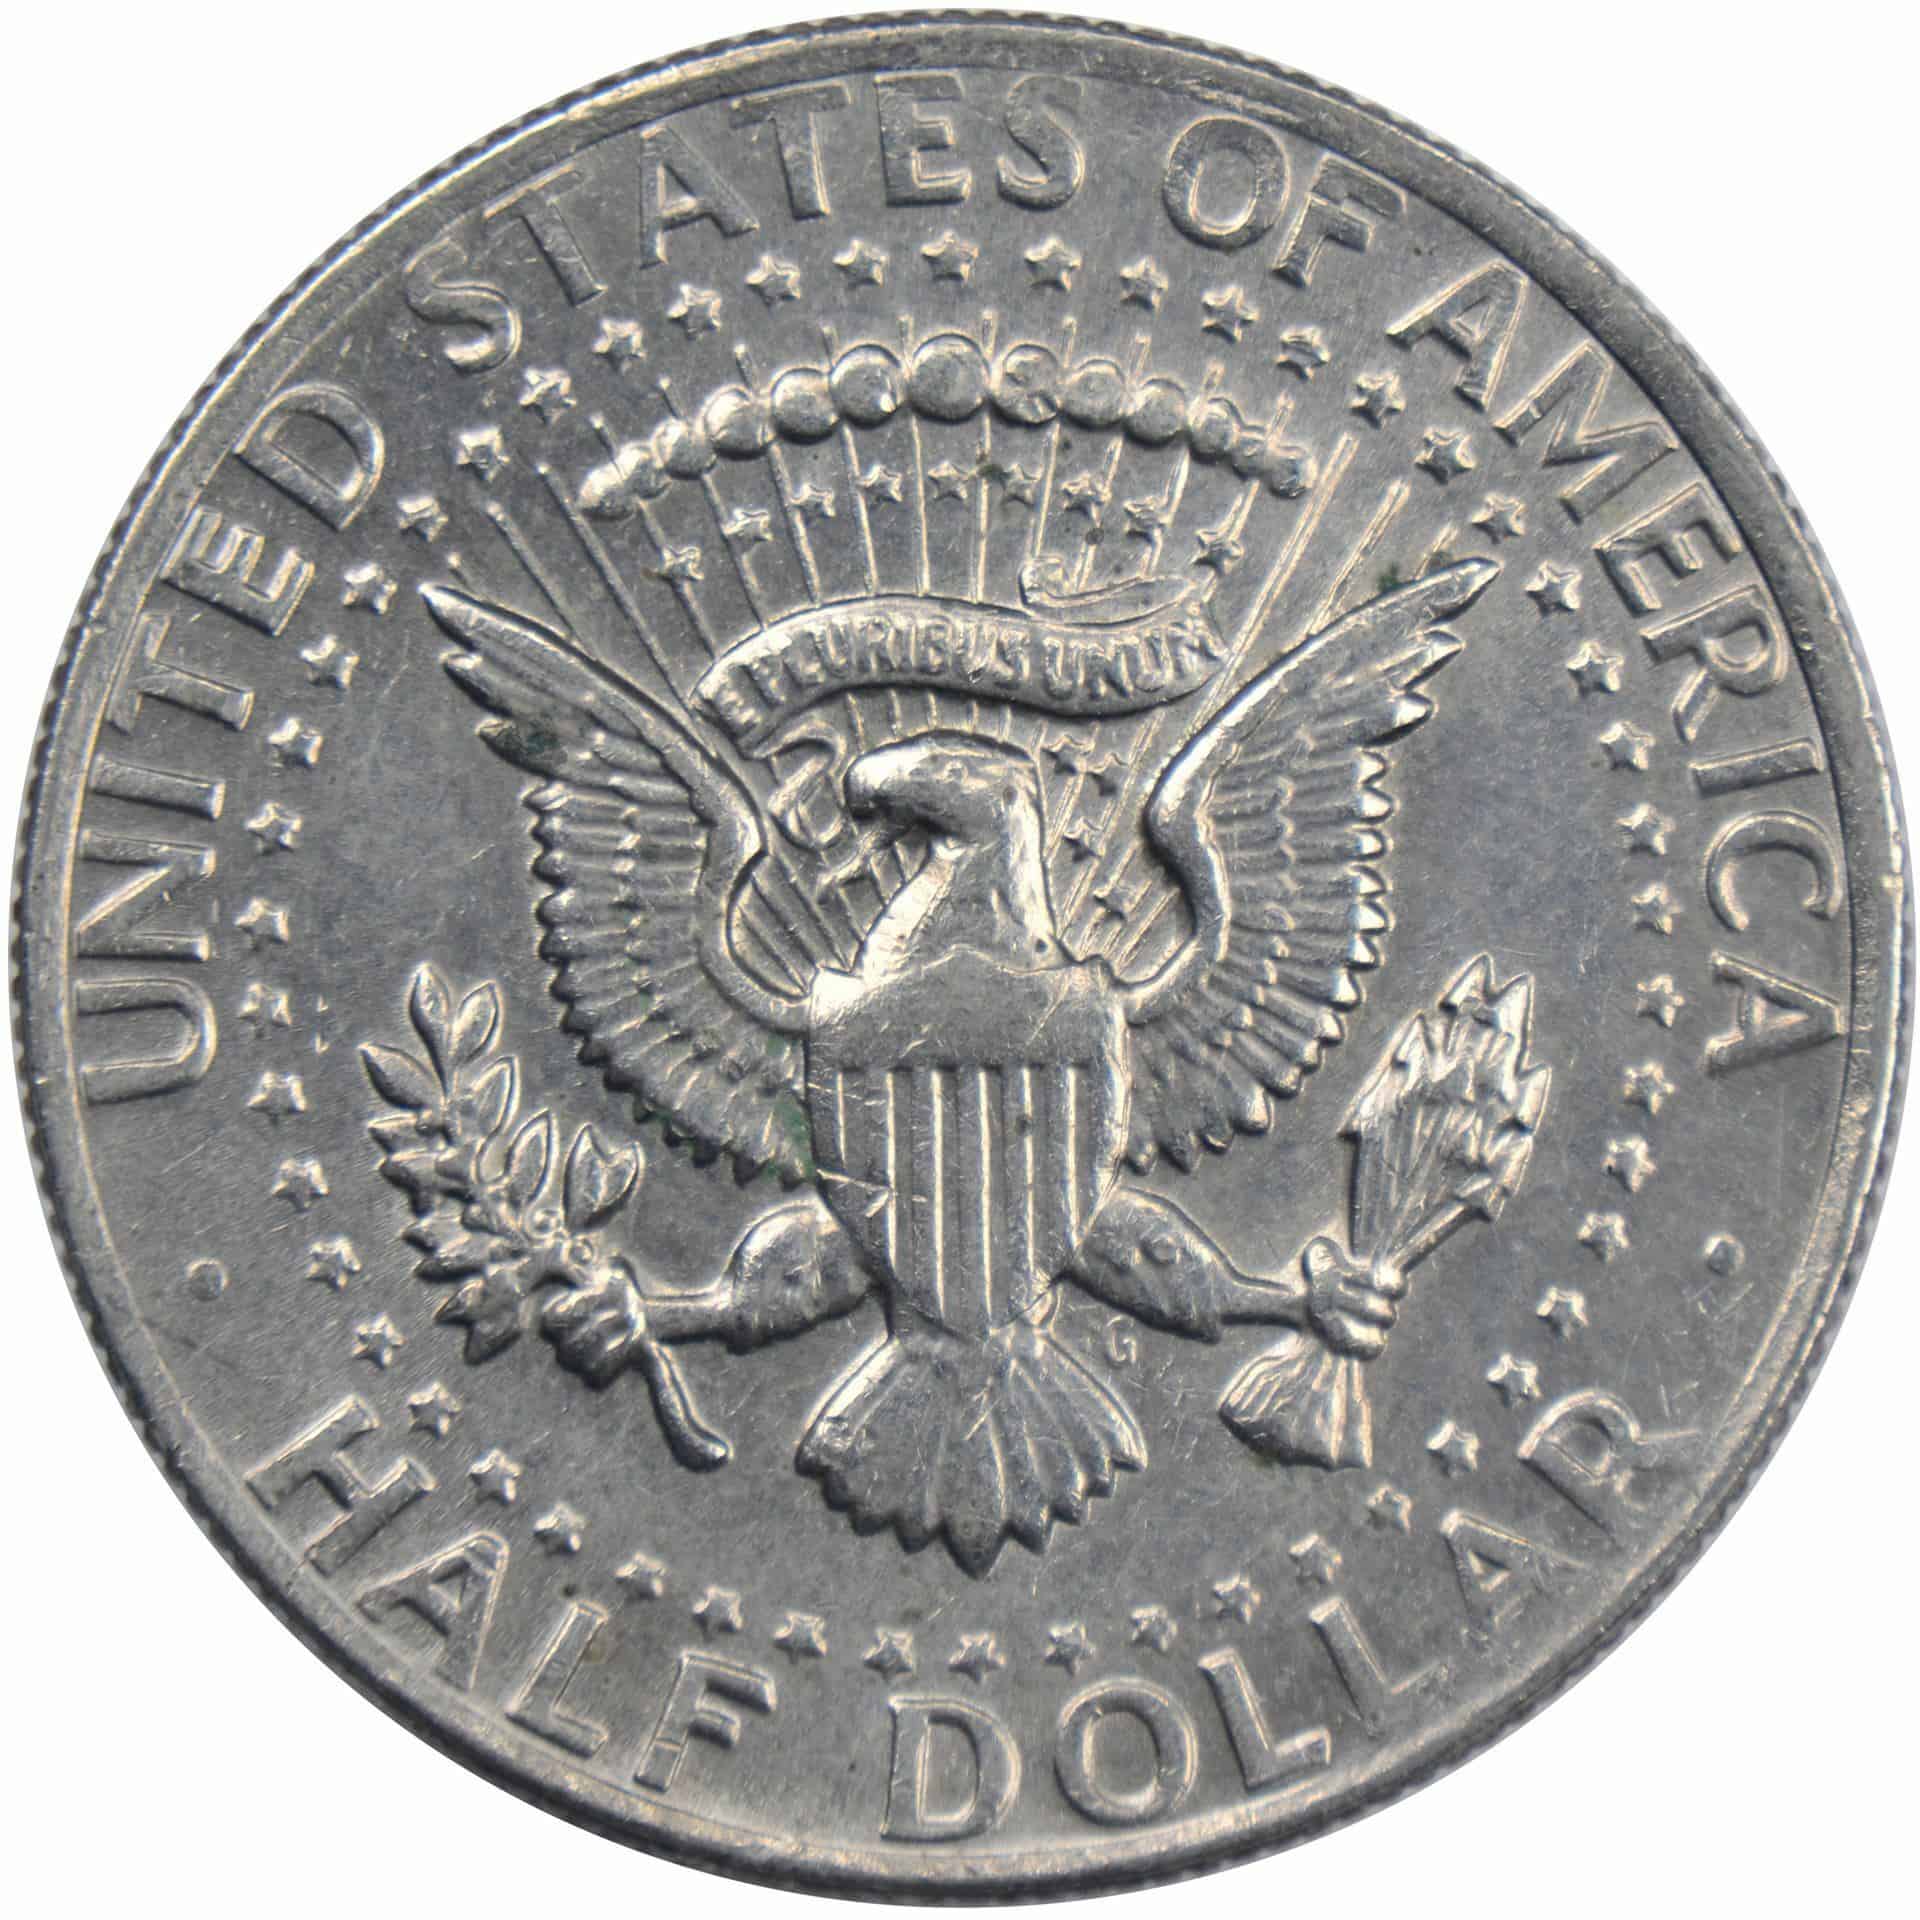 The Reverse of the 1974 Half Dollar